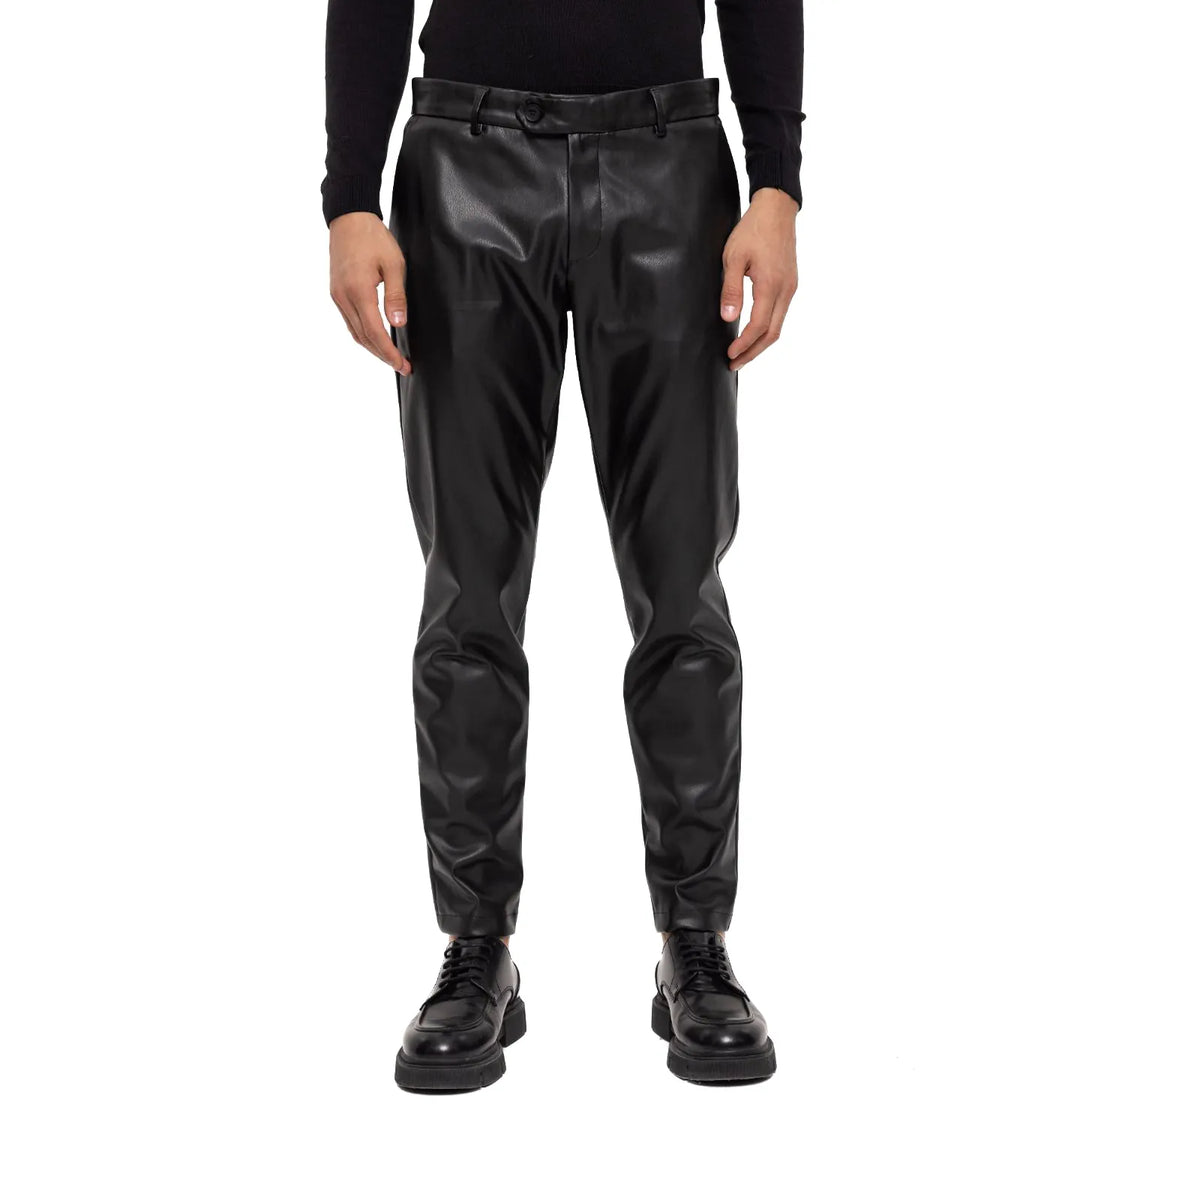 Men in leather pants | Mens leather pants, Leather pants, Leather jeans